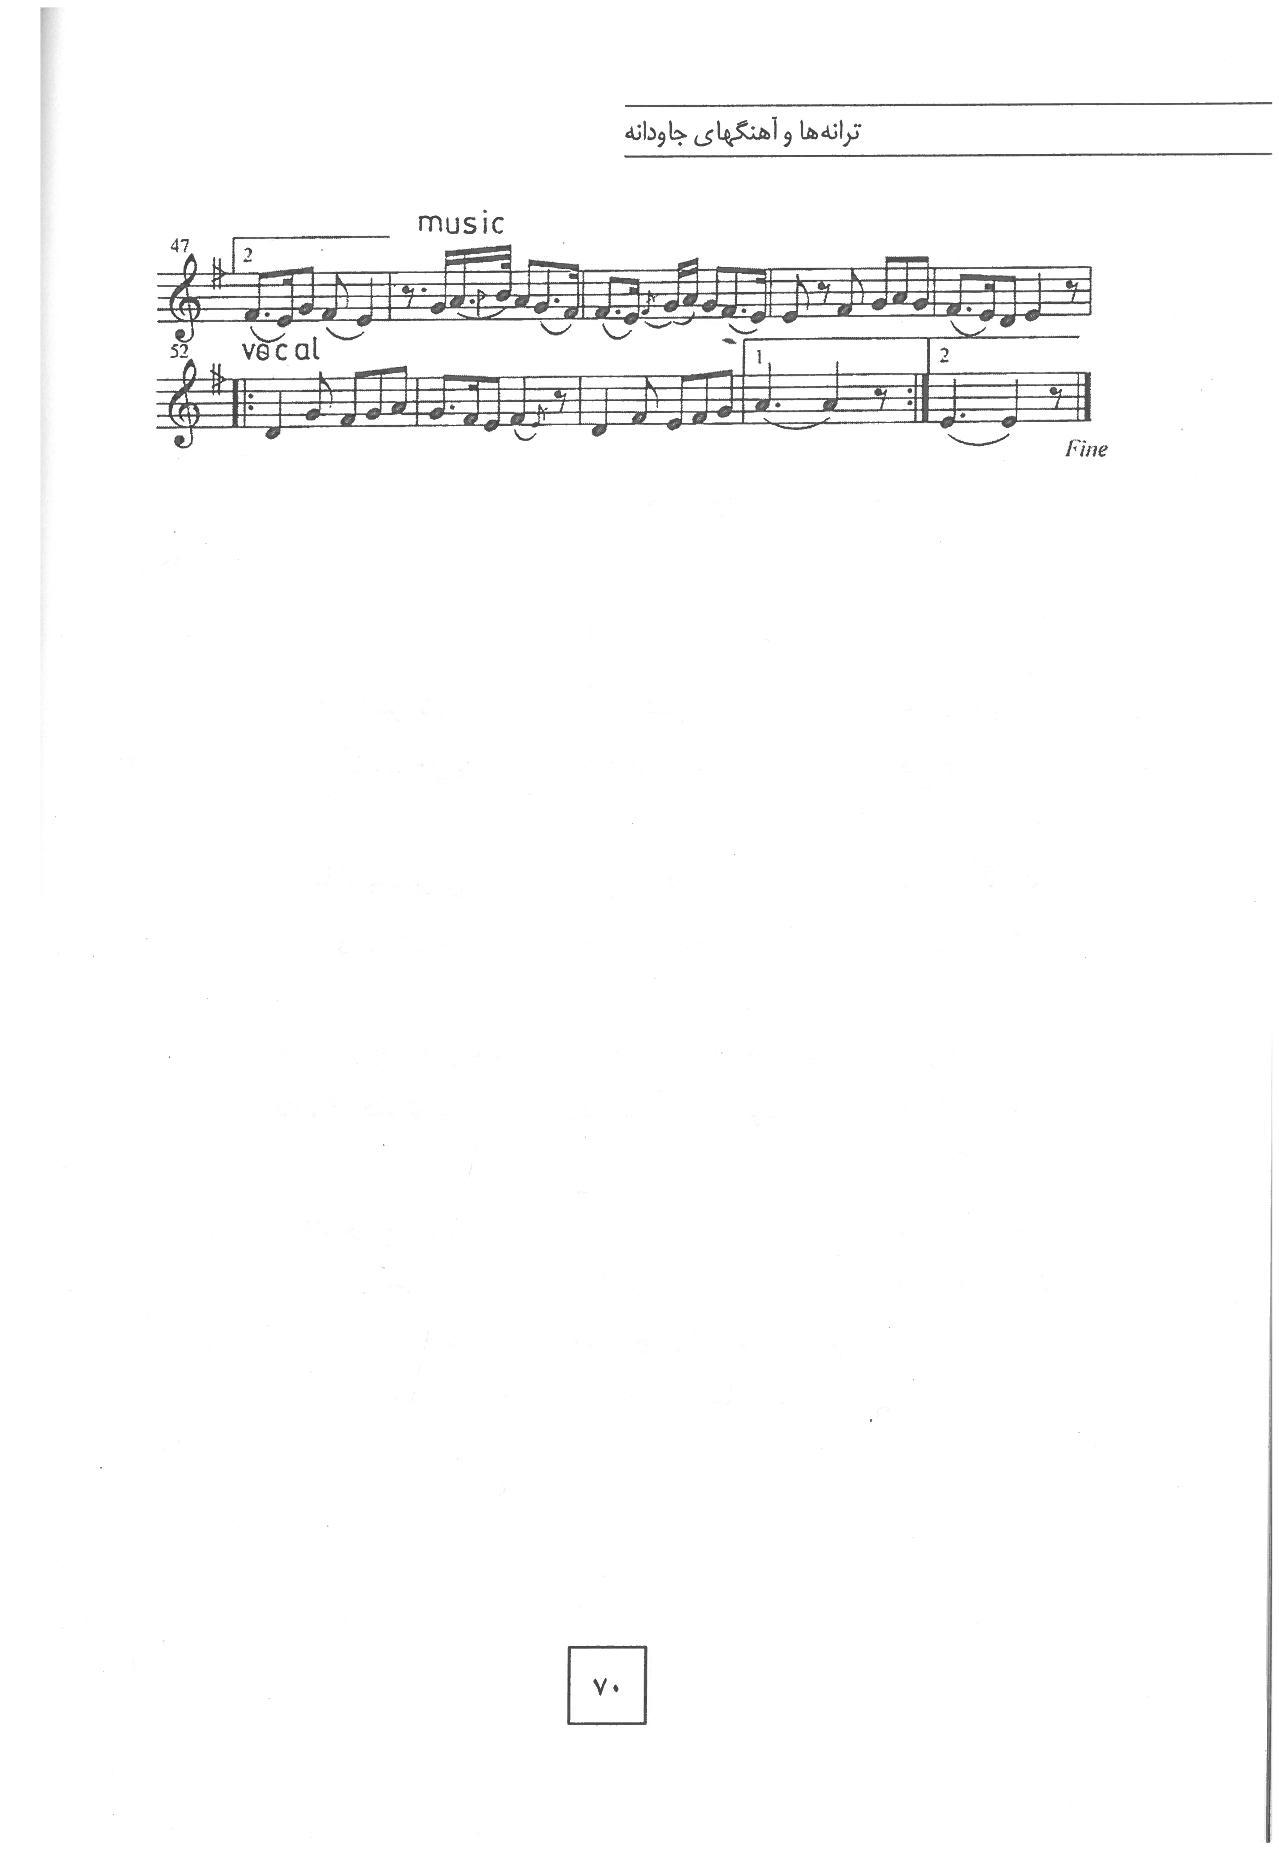 A sheet music page with the words " a little bit of something " written in it.